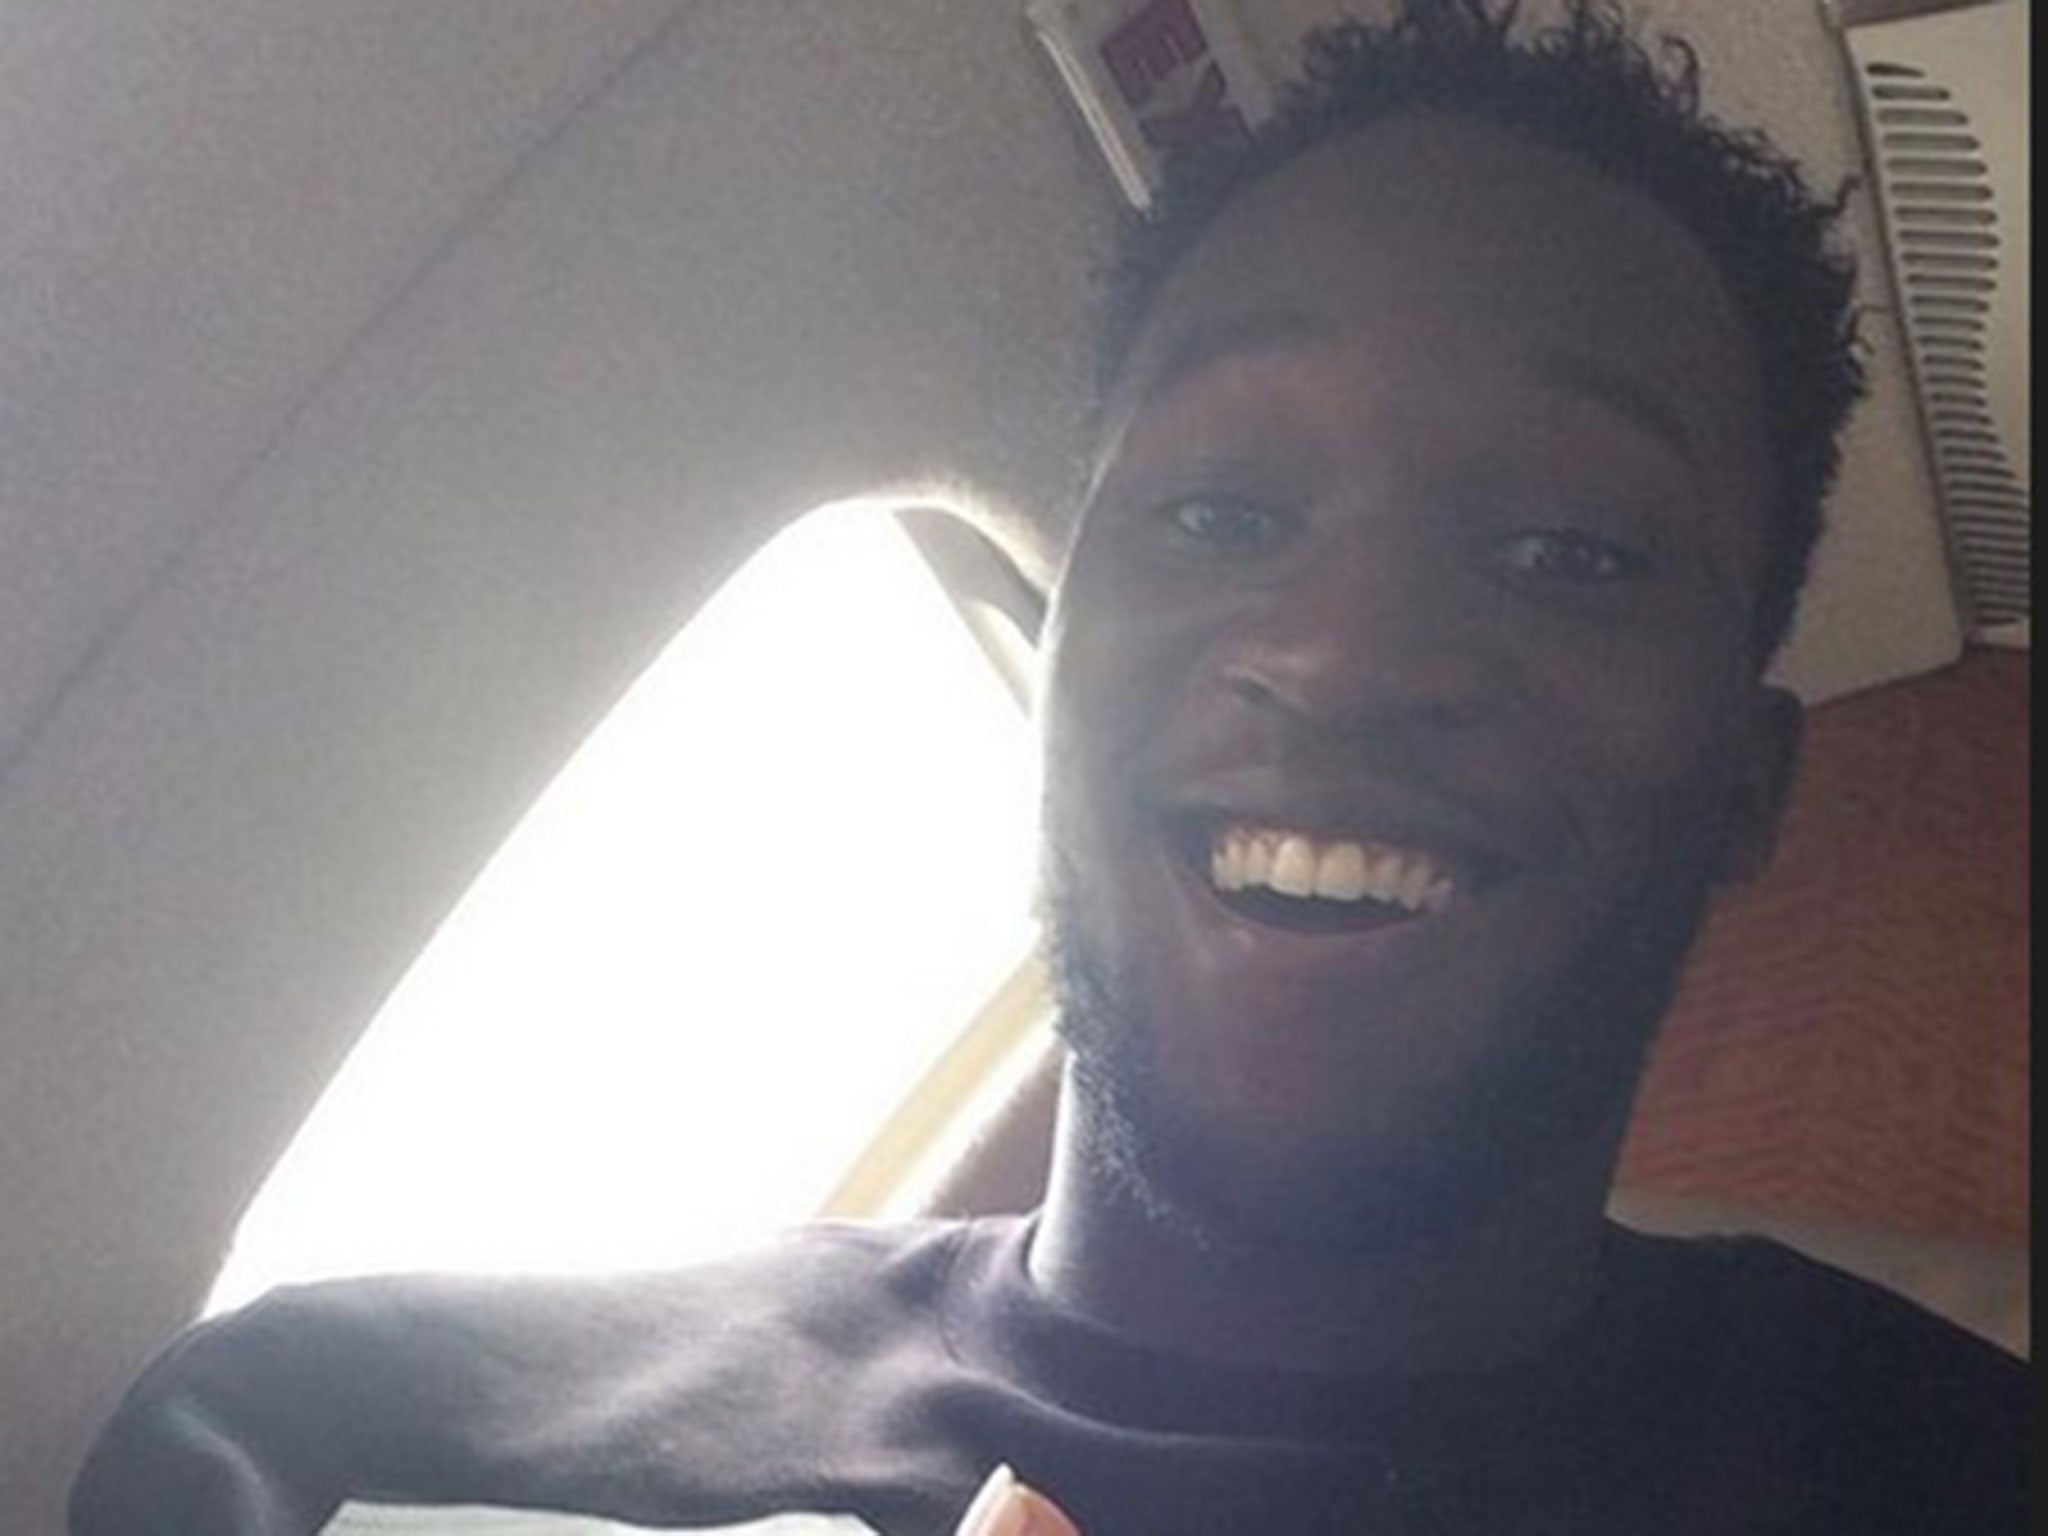 Romelu Lukaku posted this picture on his Twitter account today, saying that it was 'time to write a new chapter'